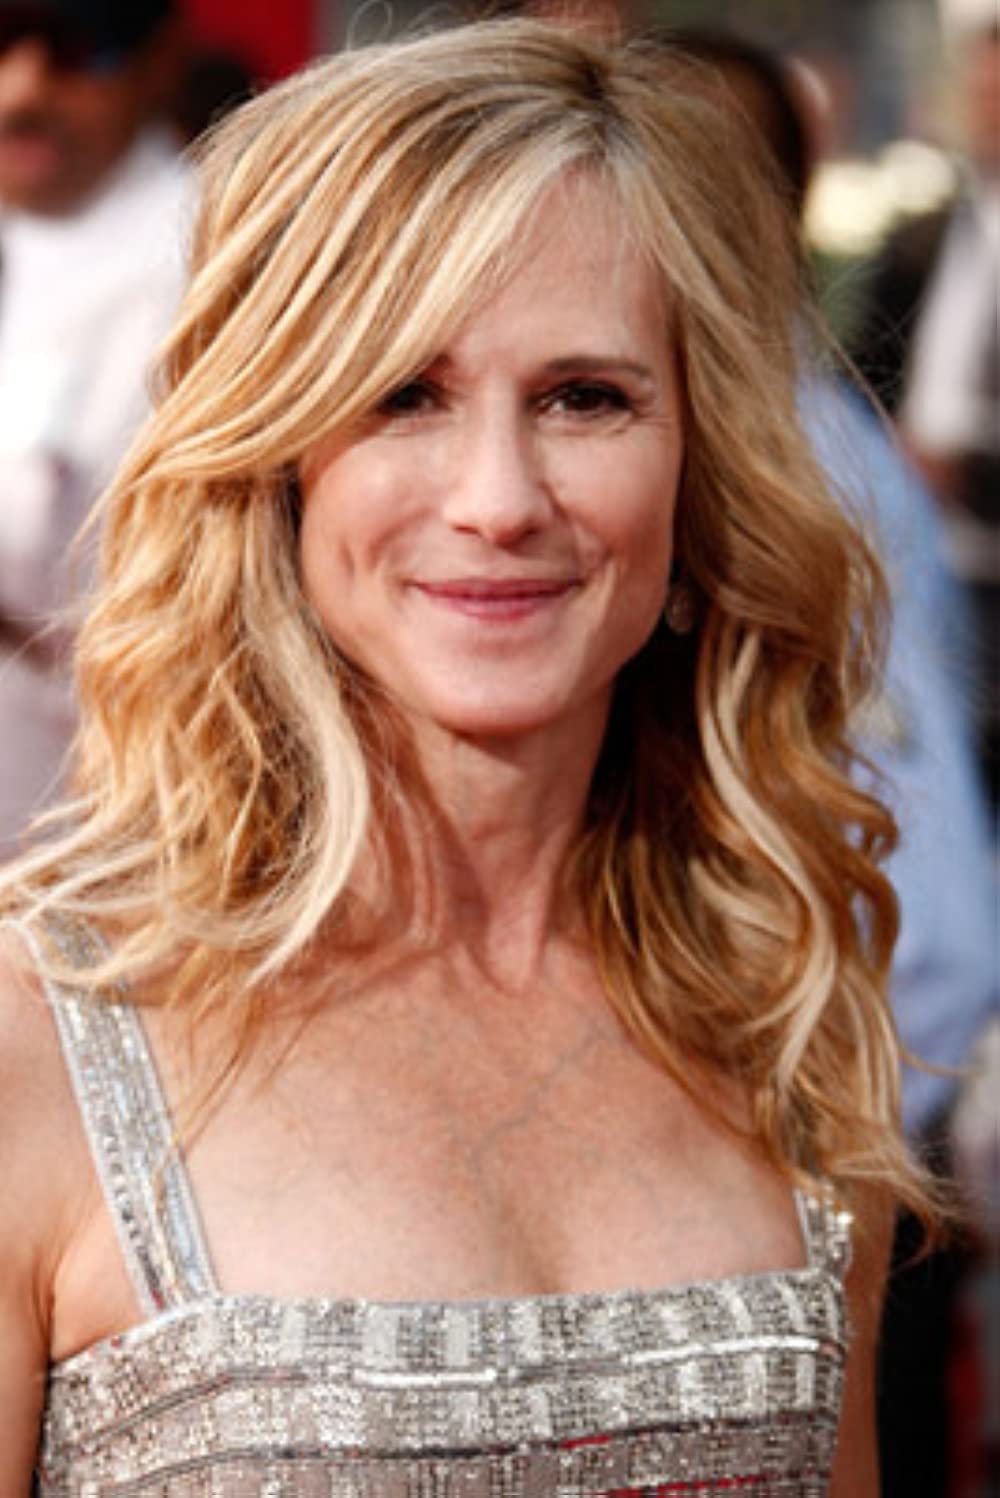 Holly Hunter Wallpapers